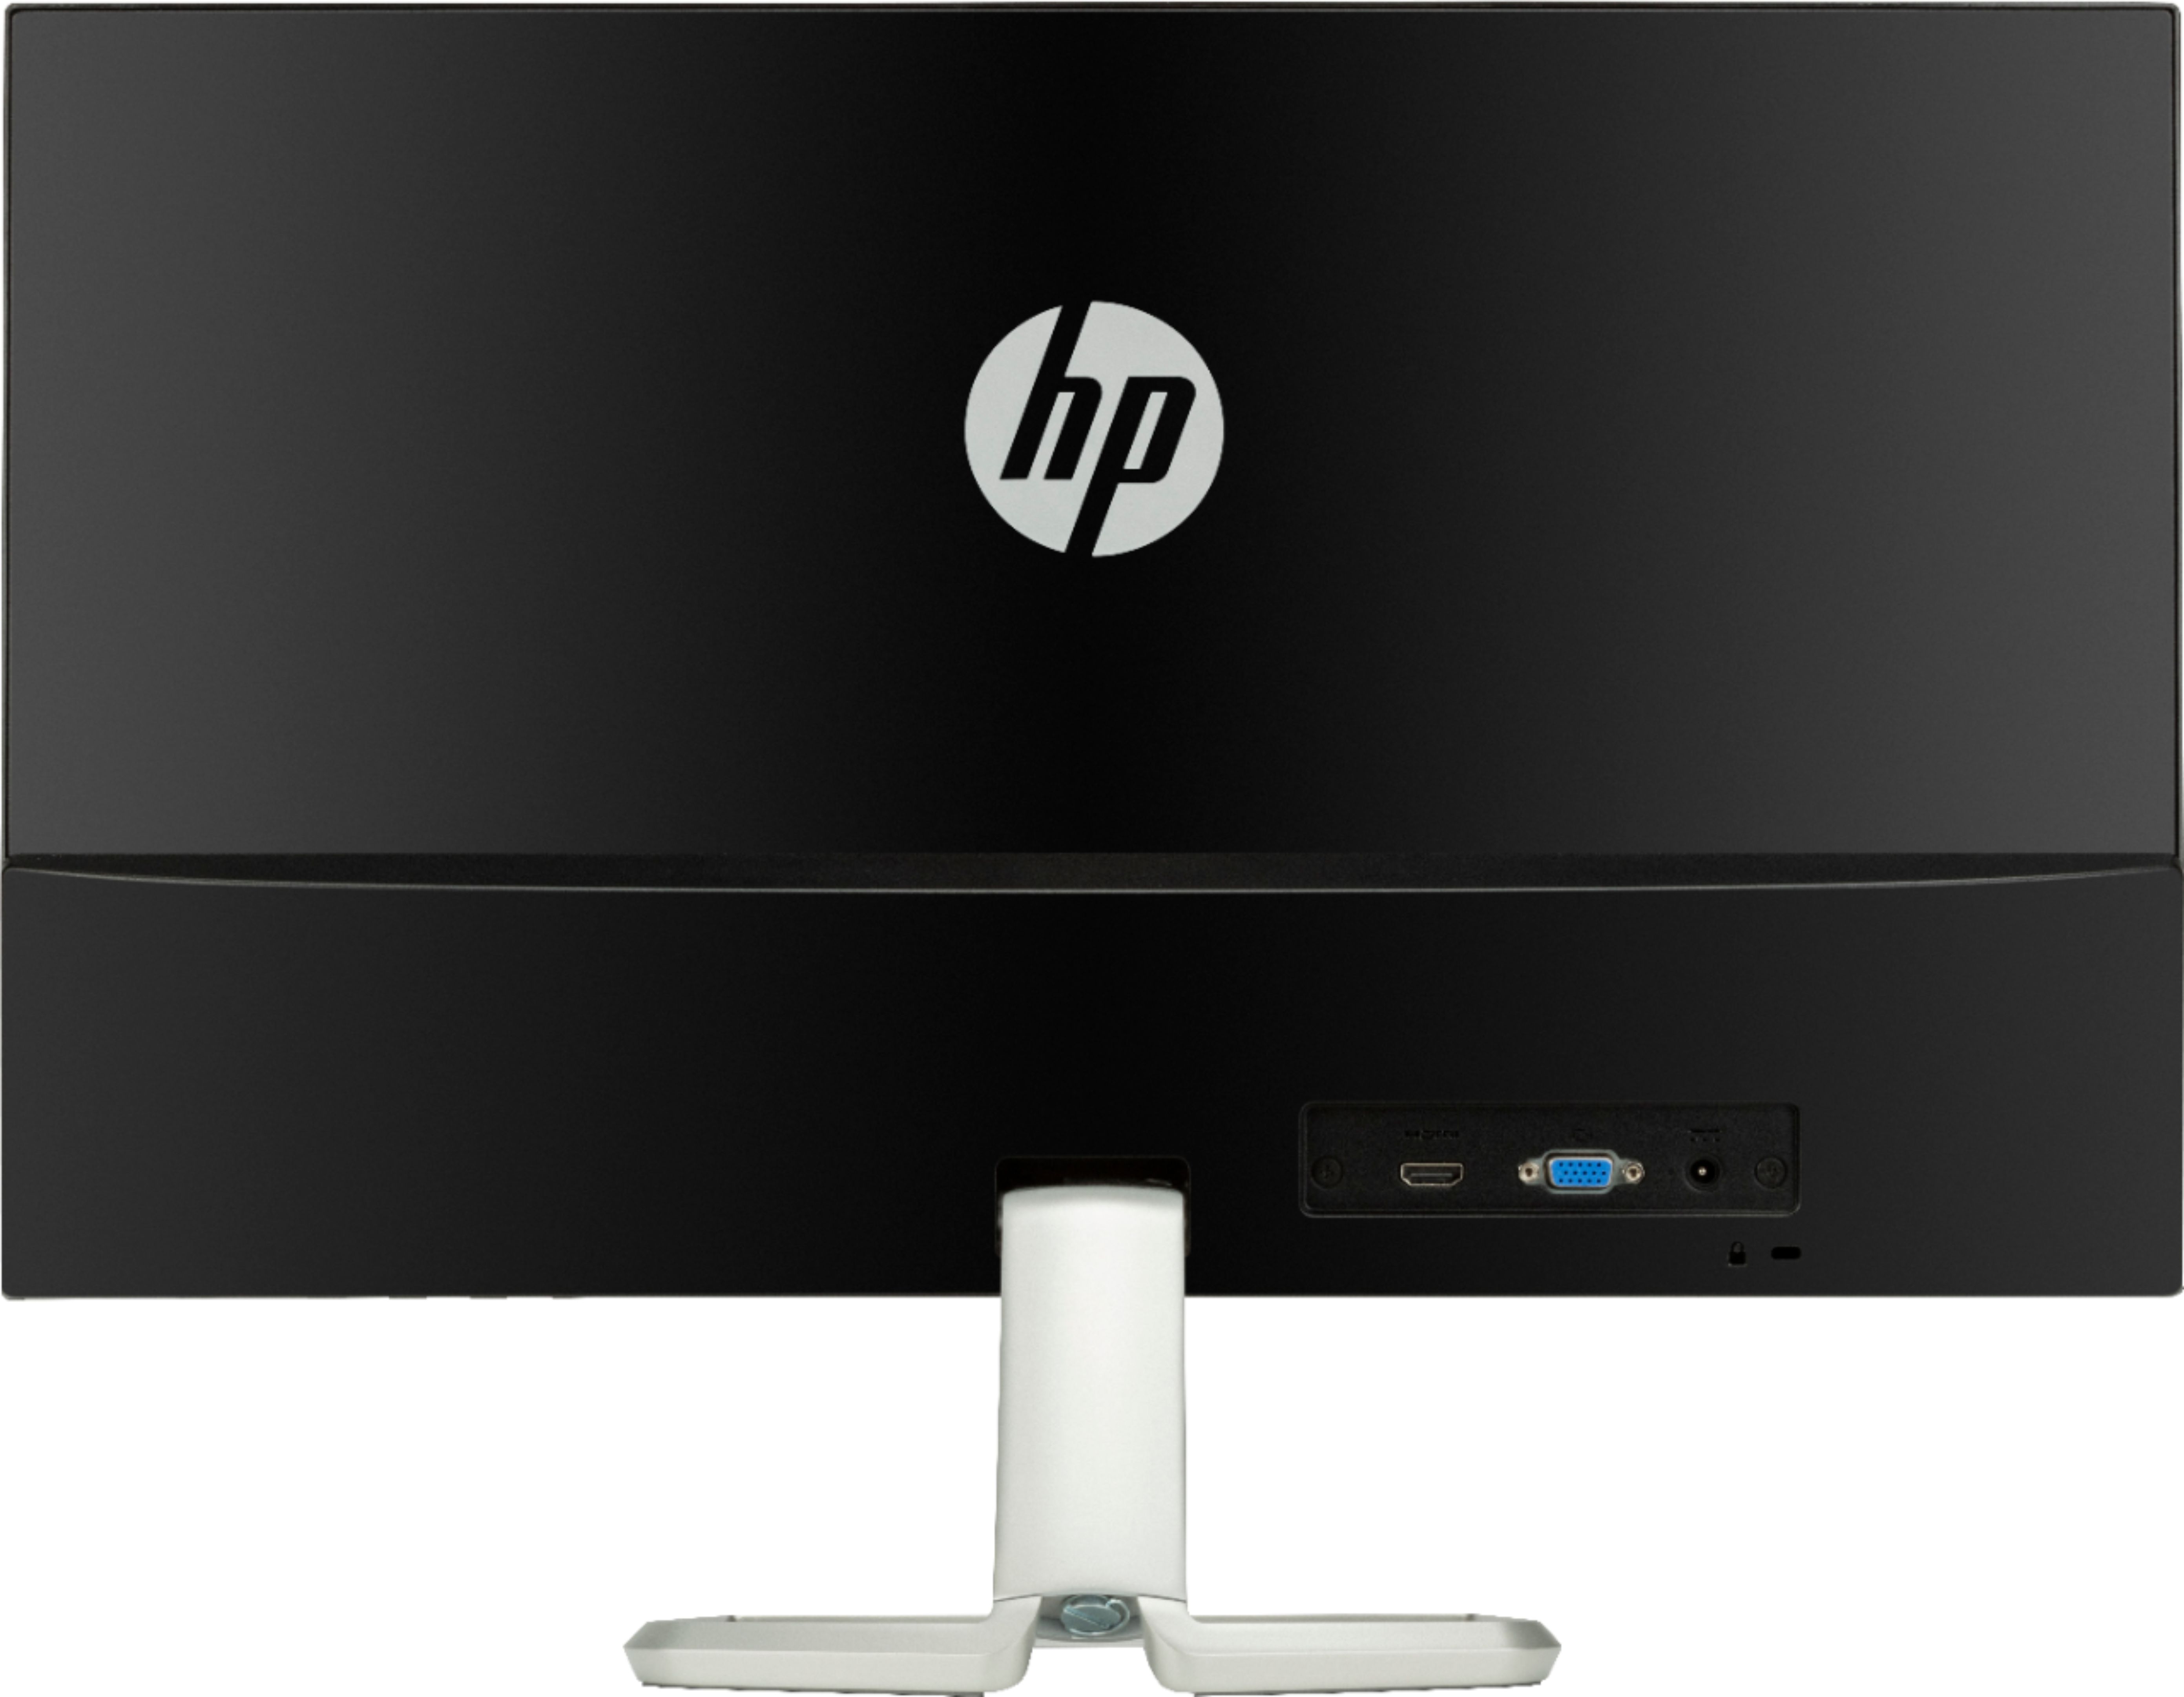 Back View: HP - Geek Squad Certified Refurbished 23.8" IPS LED FHD FreeSync Monitor - Natural Silver